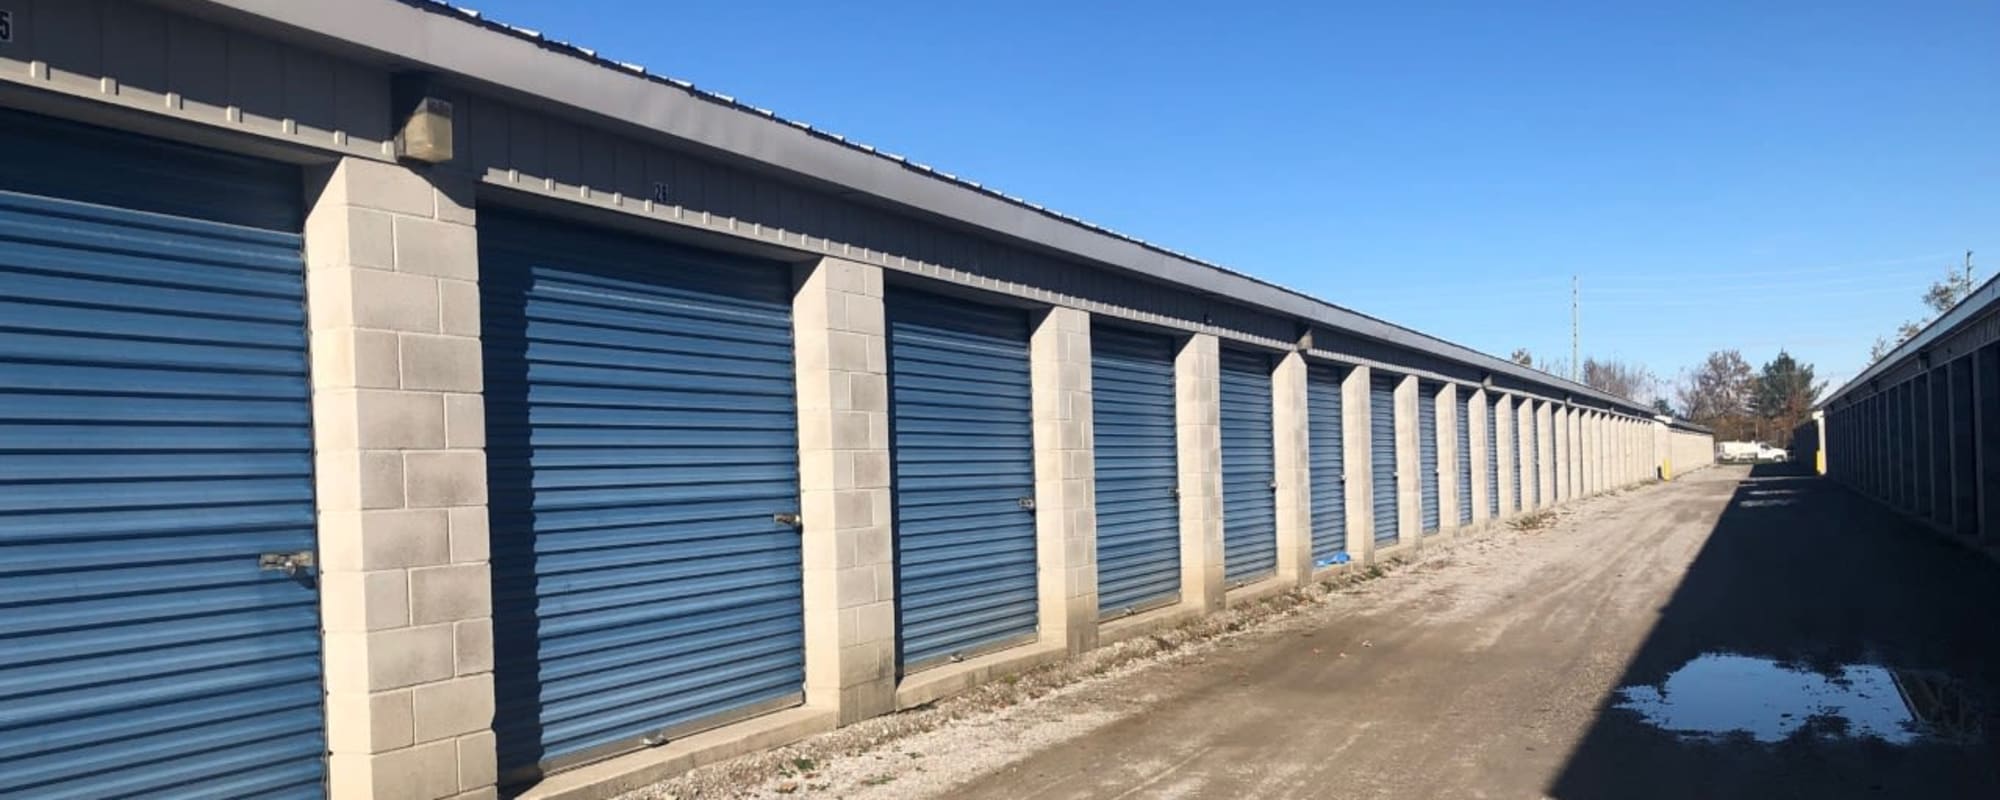 Blog page for Apple Self Storage - Thorold in Welland, Ontario